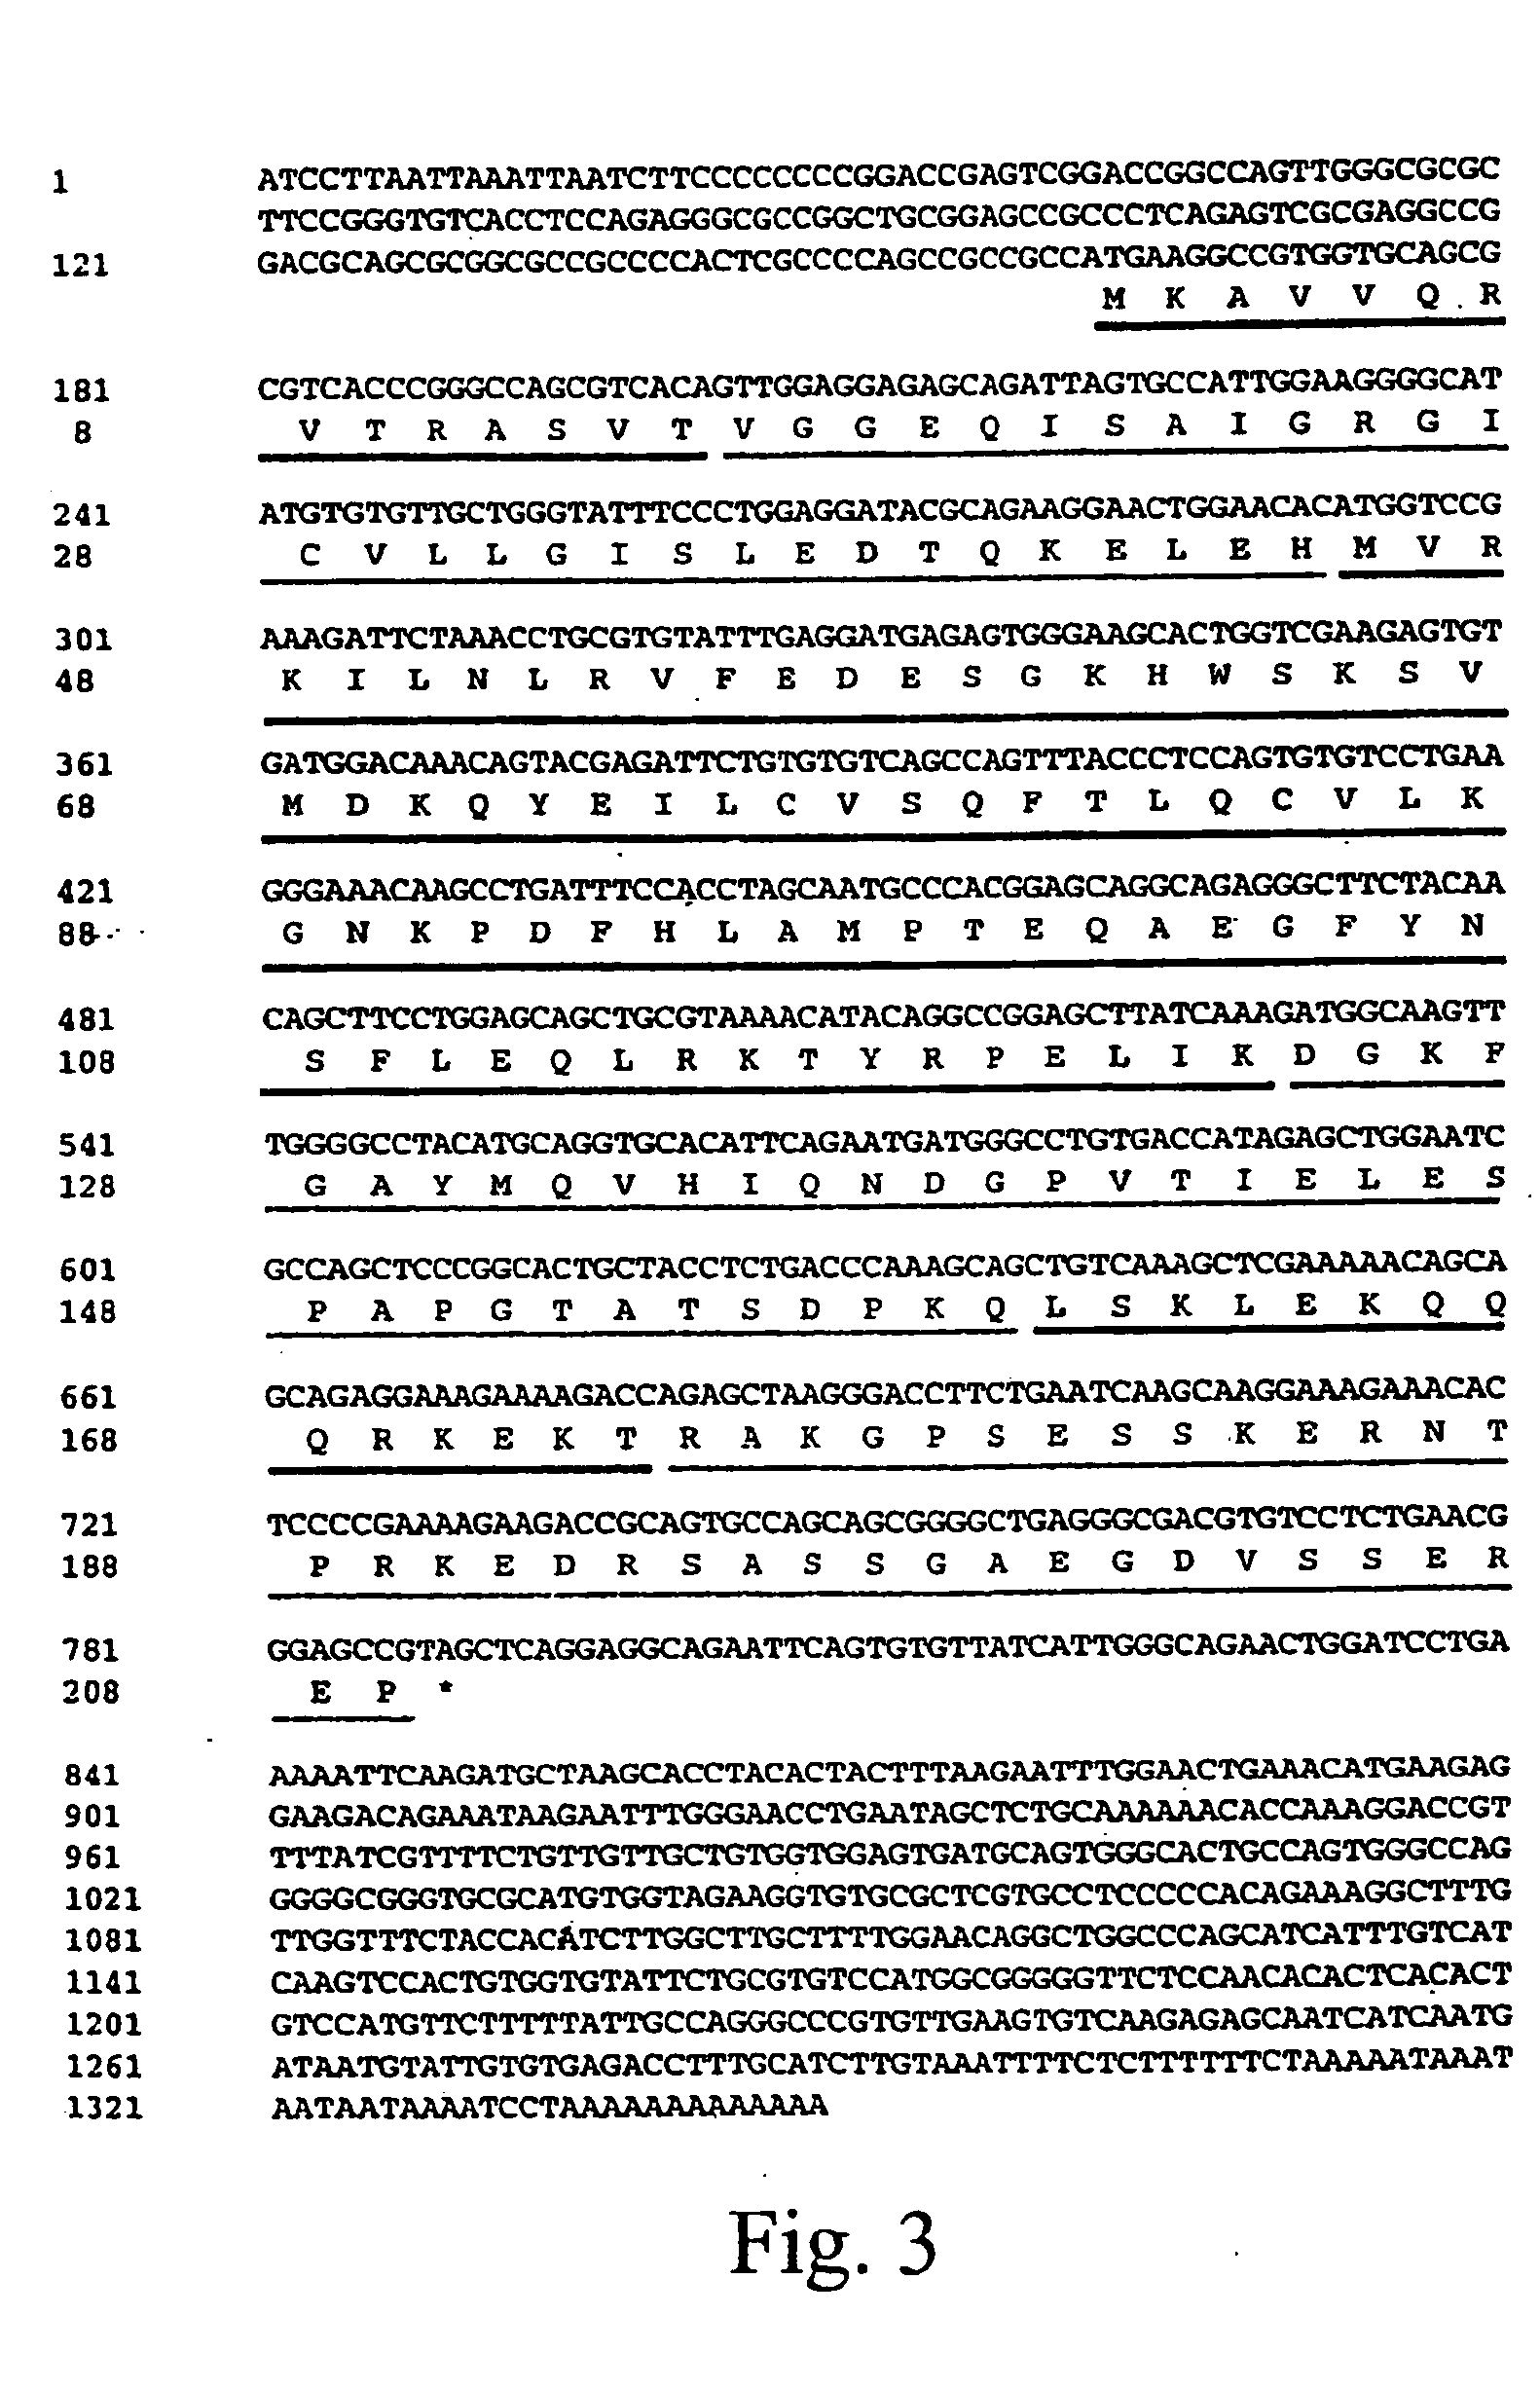 DNA binding protein